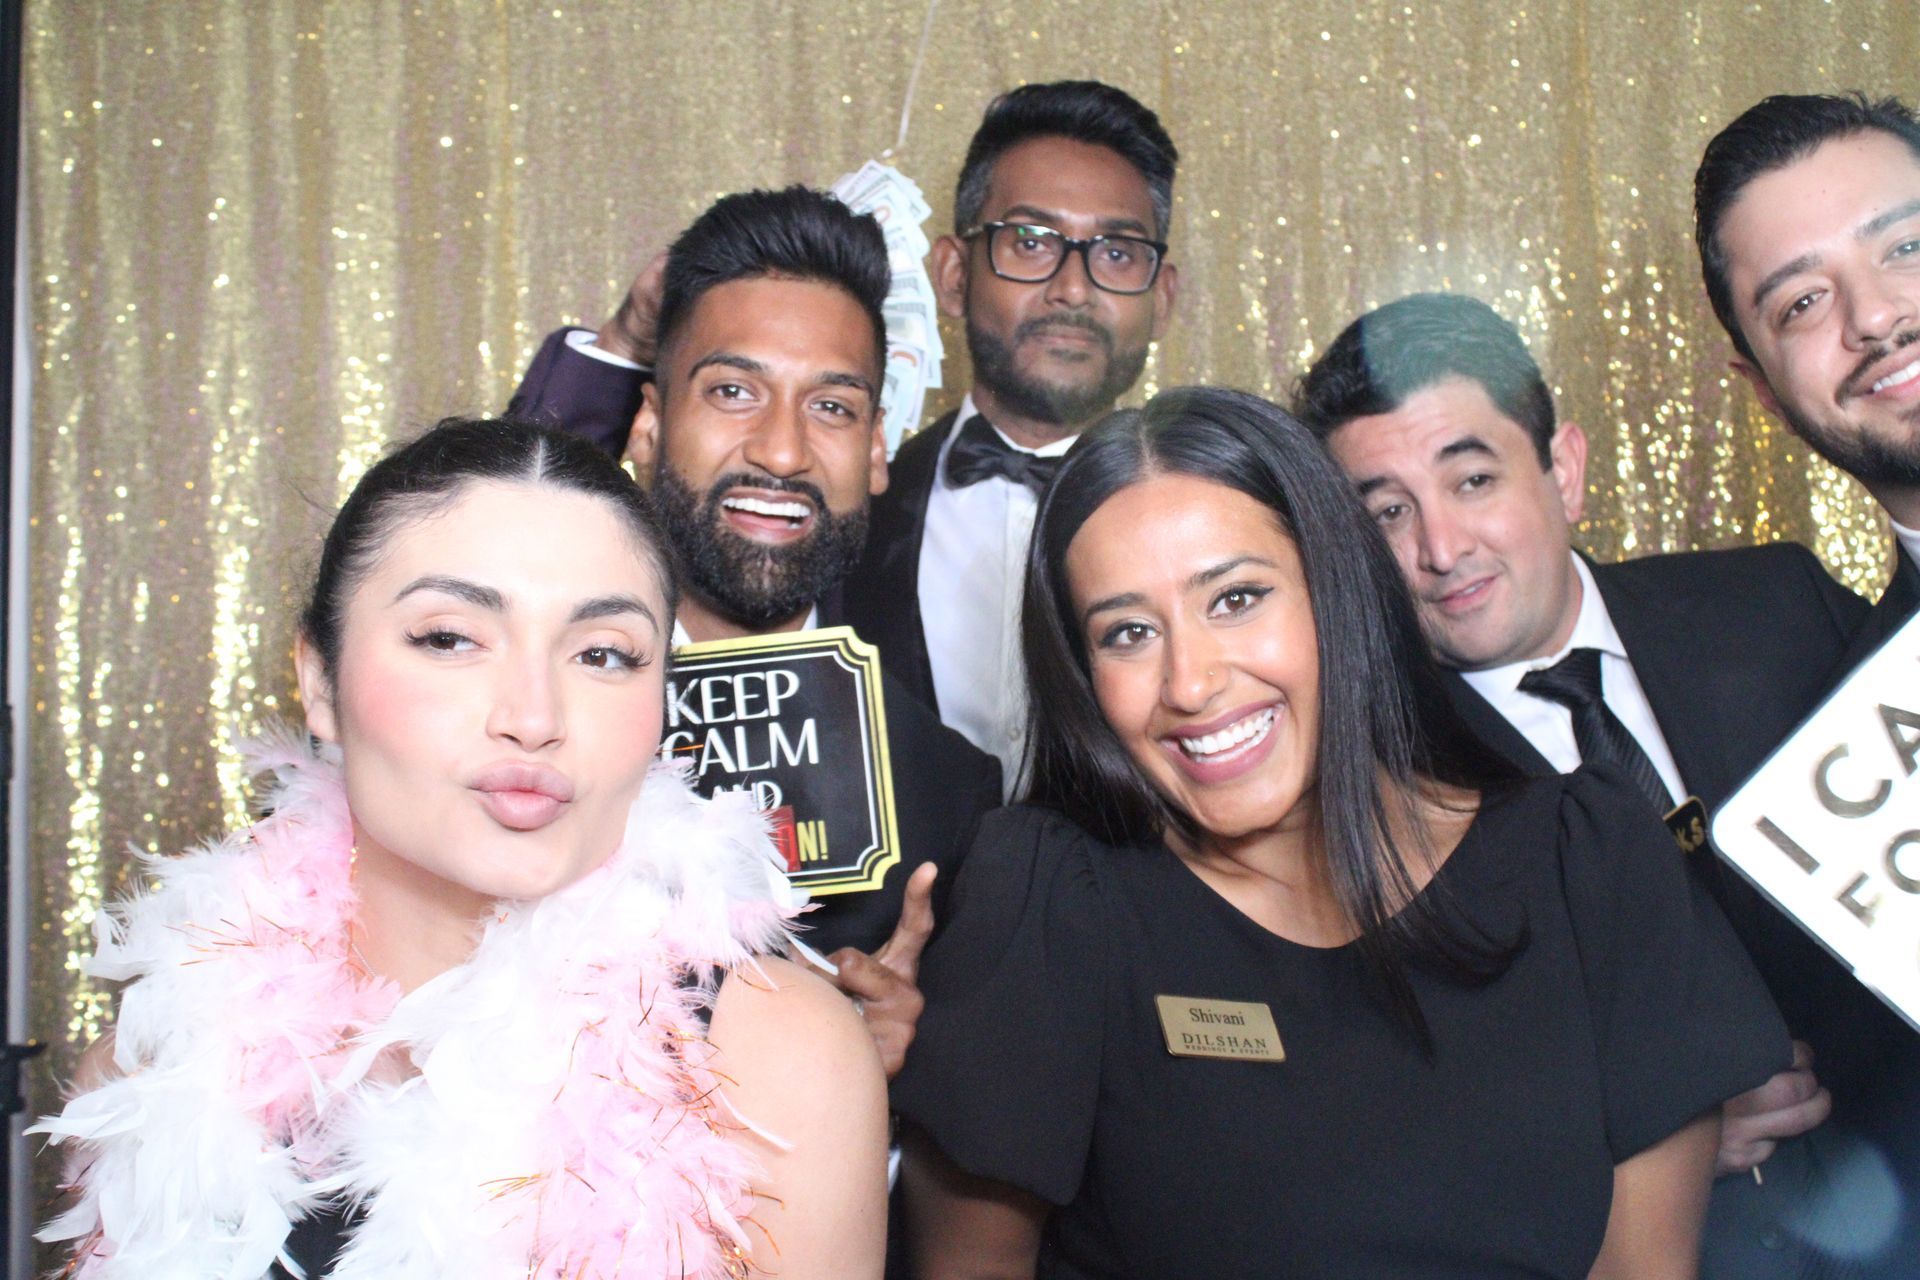 Group of friends having fun with photo booth rental at San Antonio event